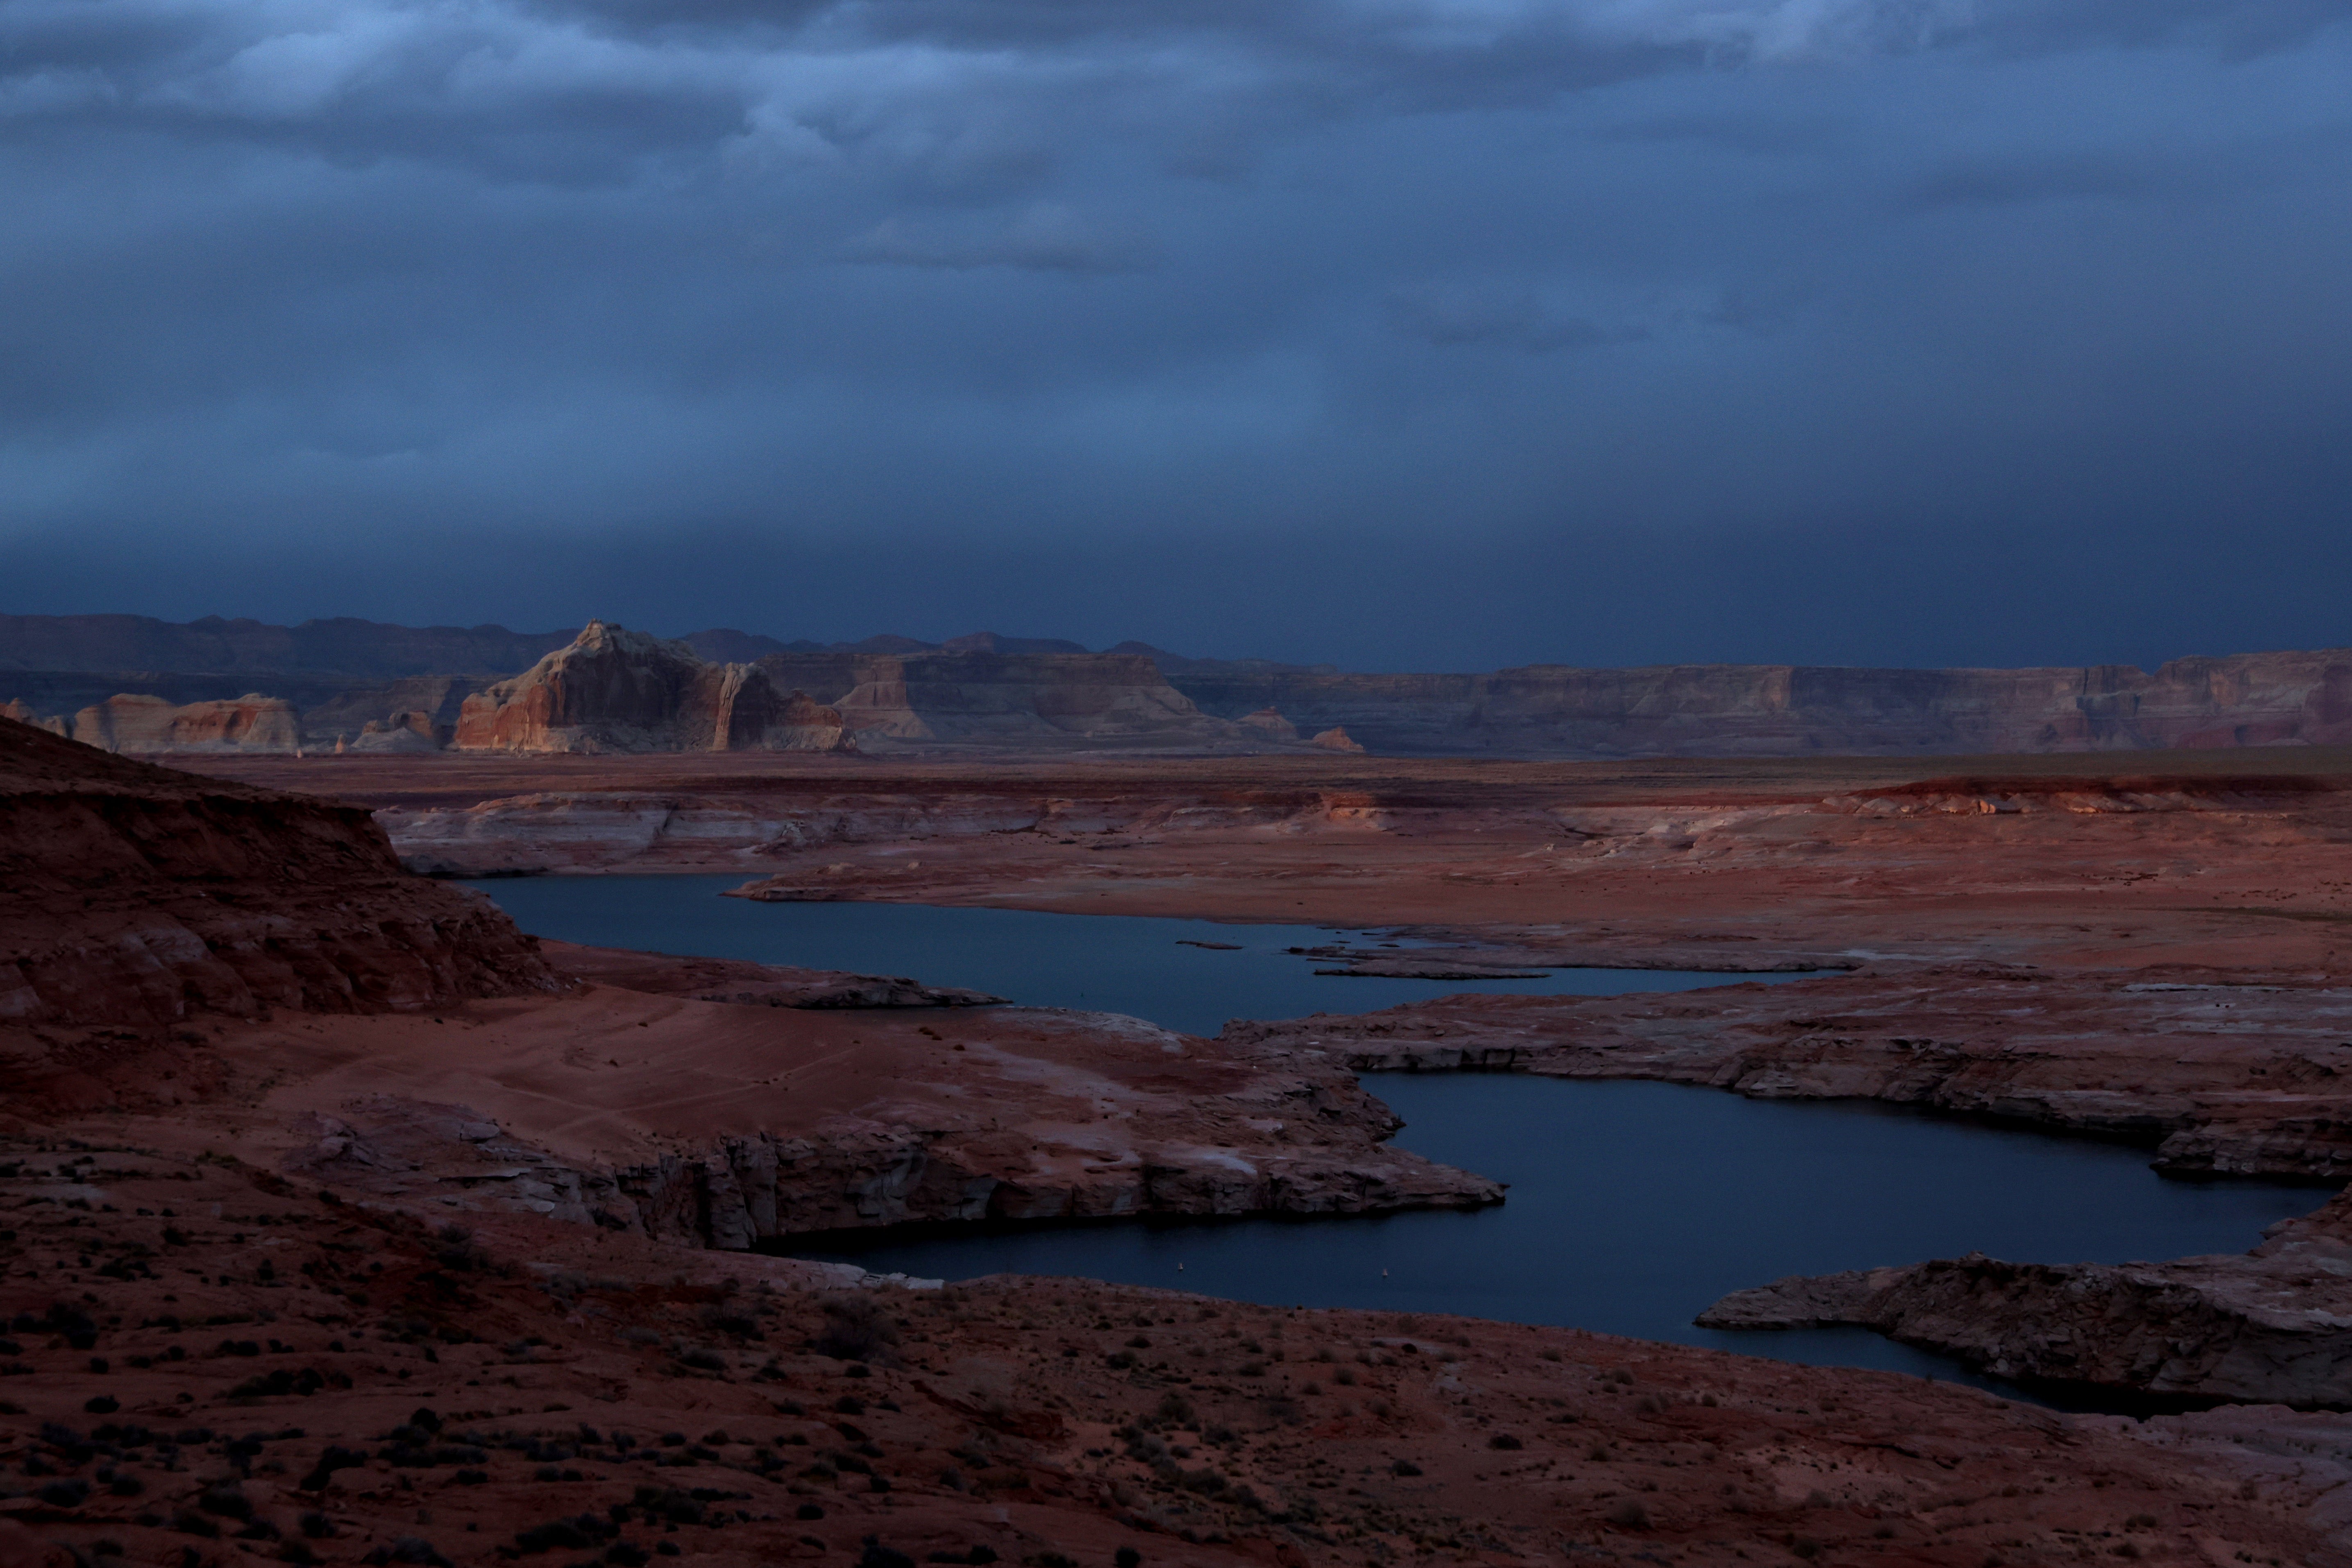  A view of Lake Powell on March 28, 2022 in Page, Arizona.  (Photo: Justin Sullivan, Getty Images)